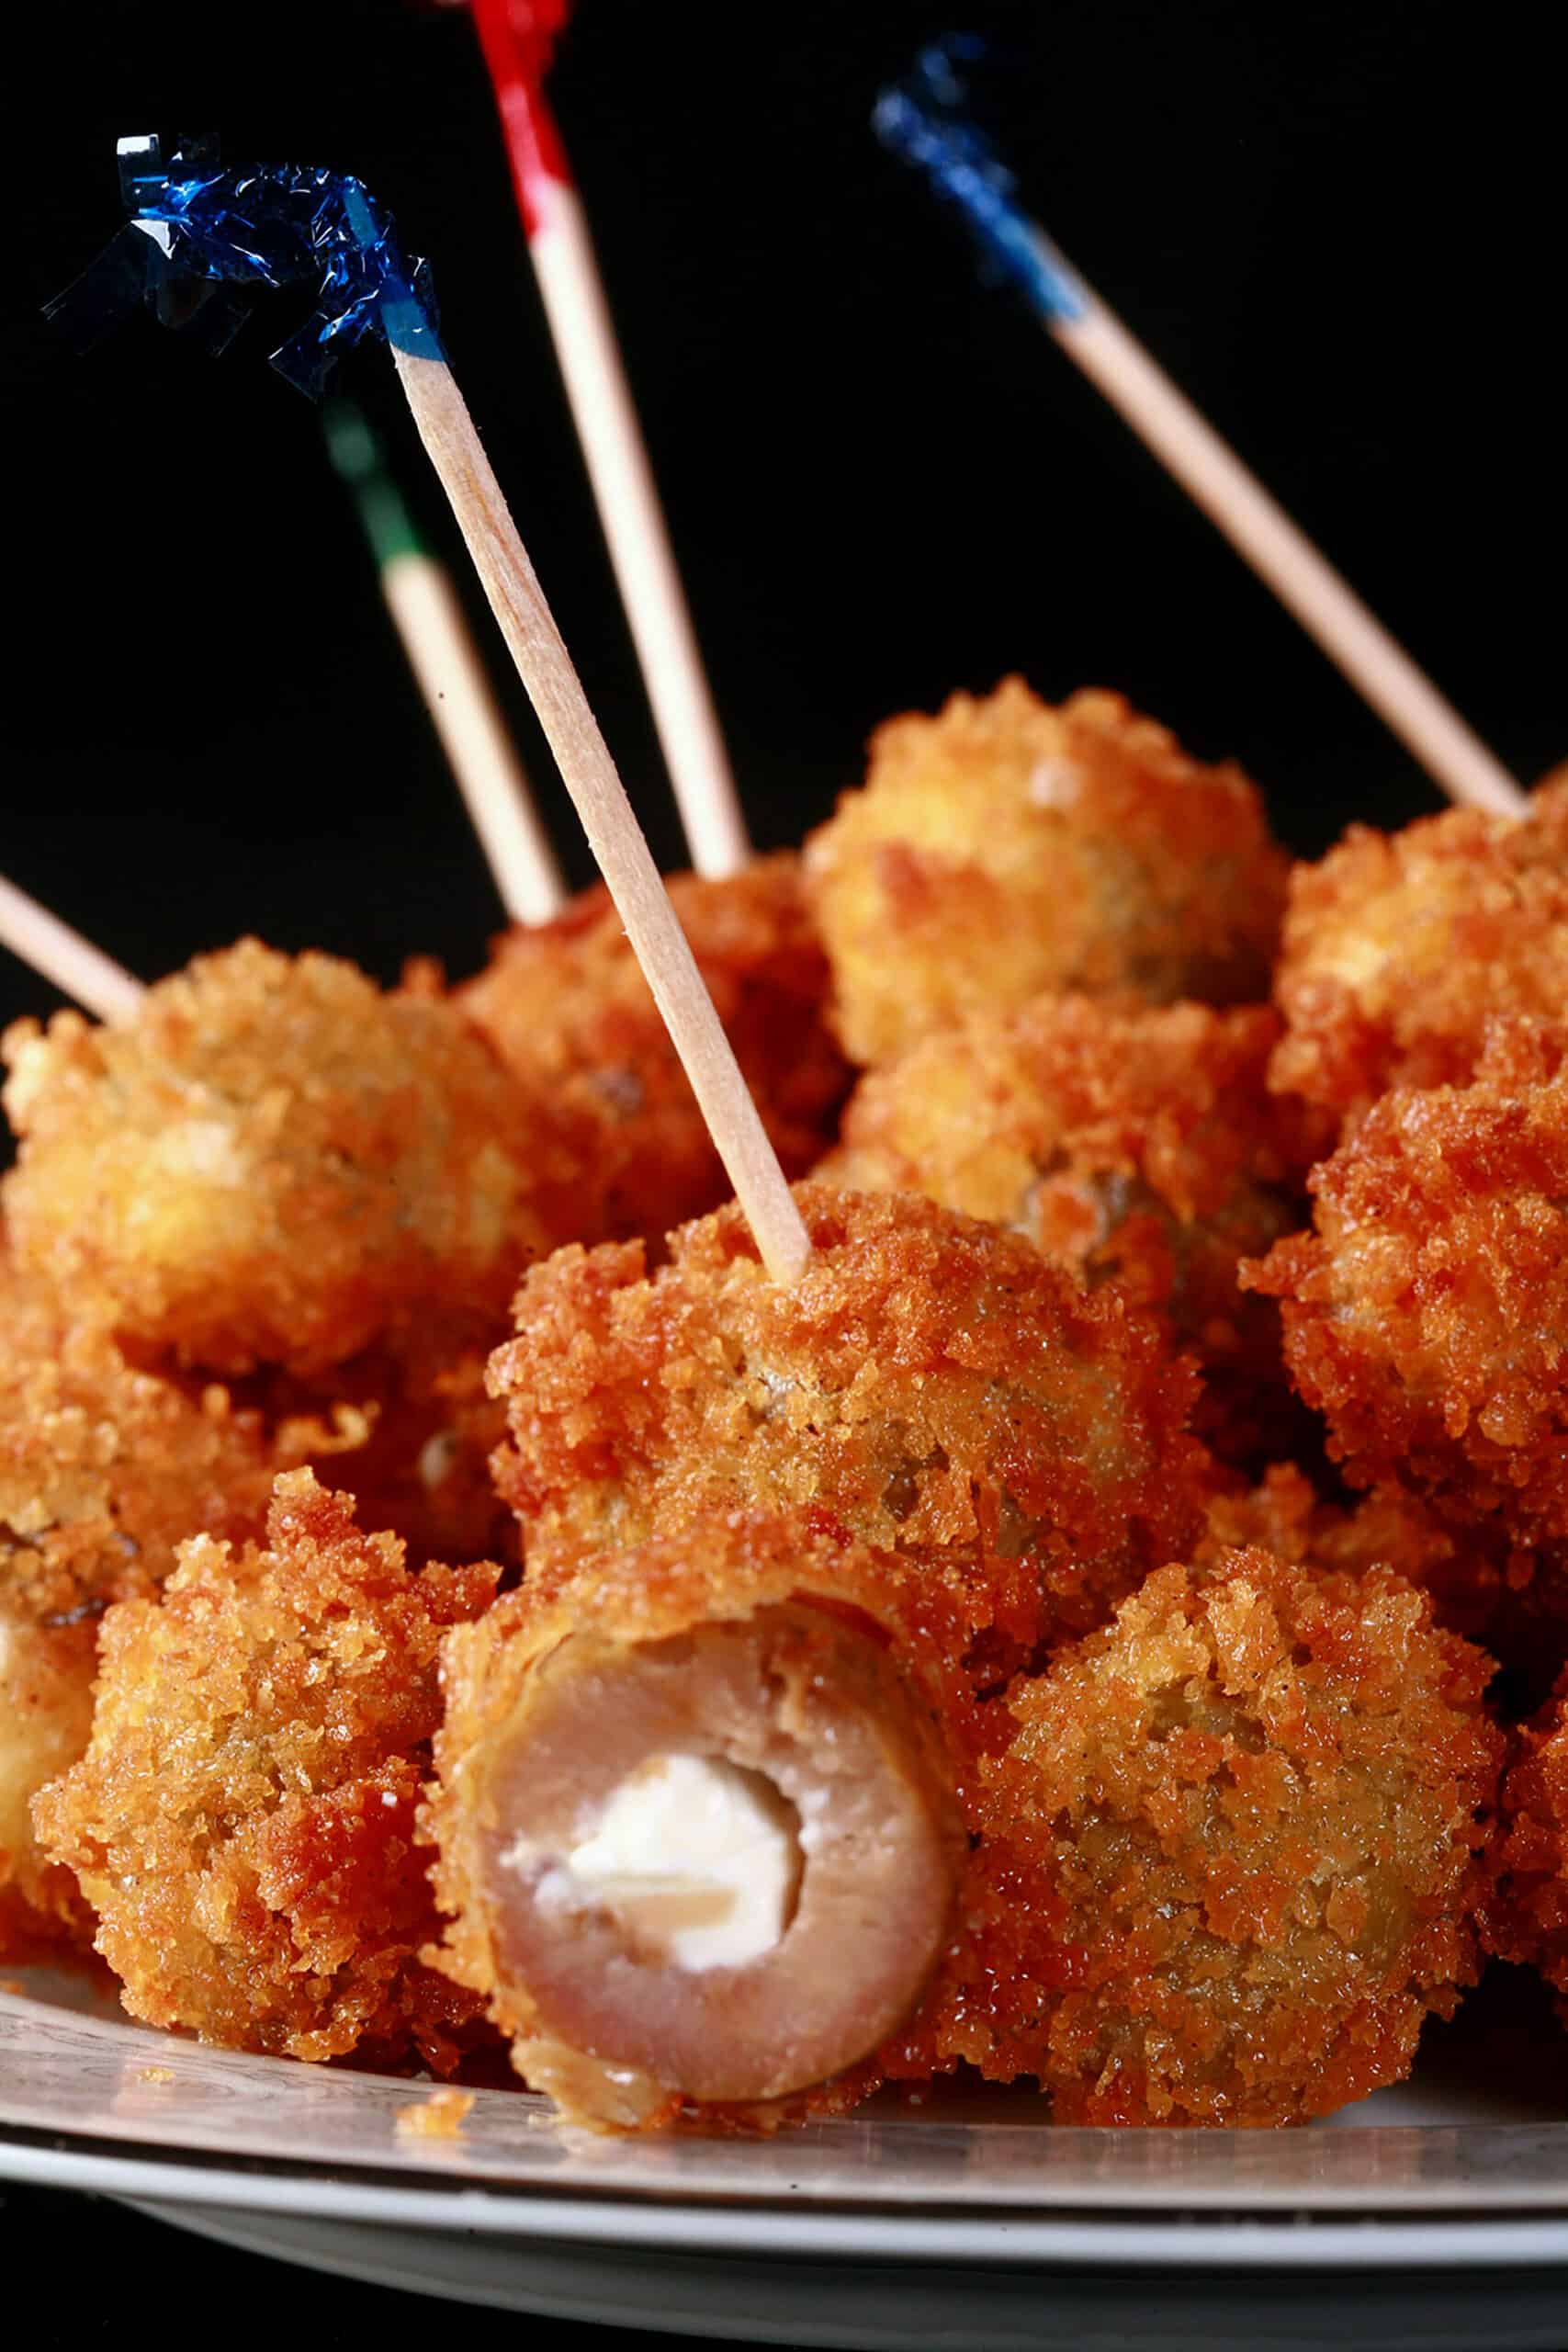 A pile of breaded deep fried olives on a plate. One is broken open to show it’s stuffed with a garlic cheese mixture.